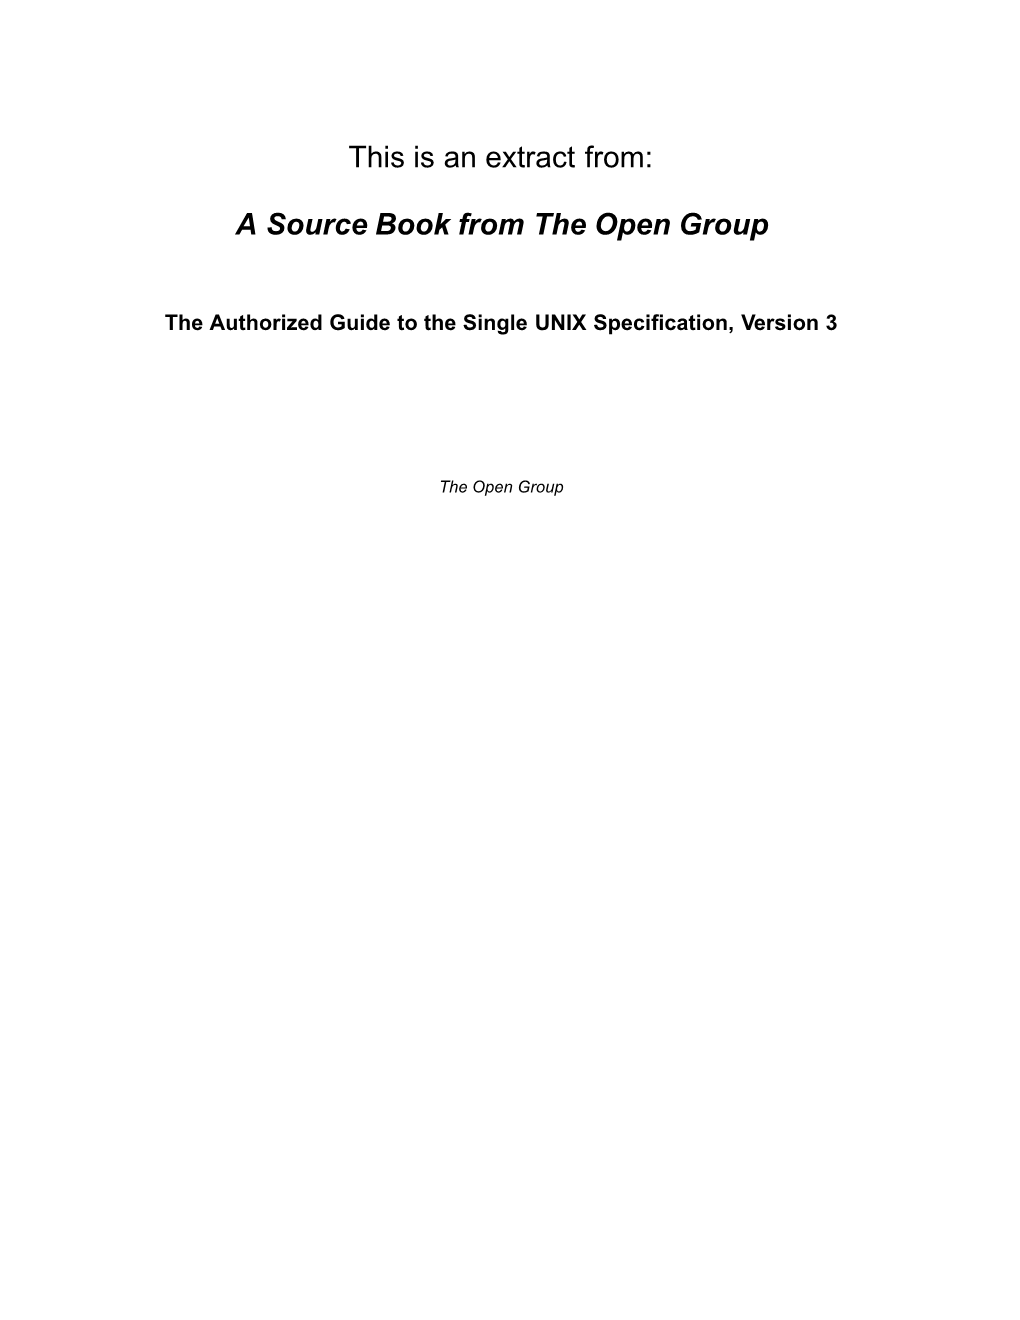 This Is an Extract From: a Source Book from the Open Group